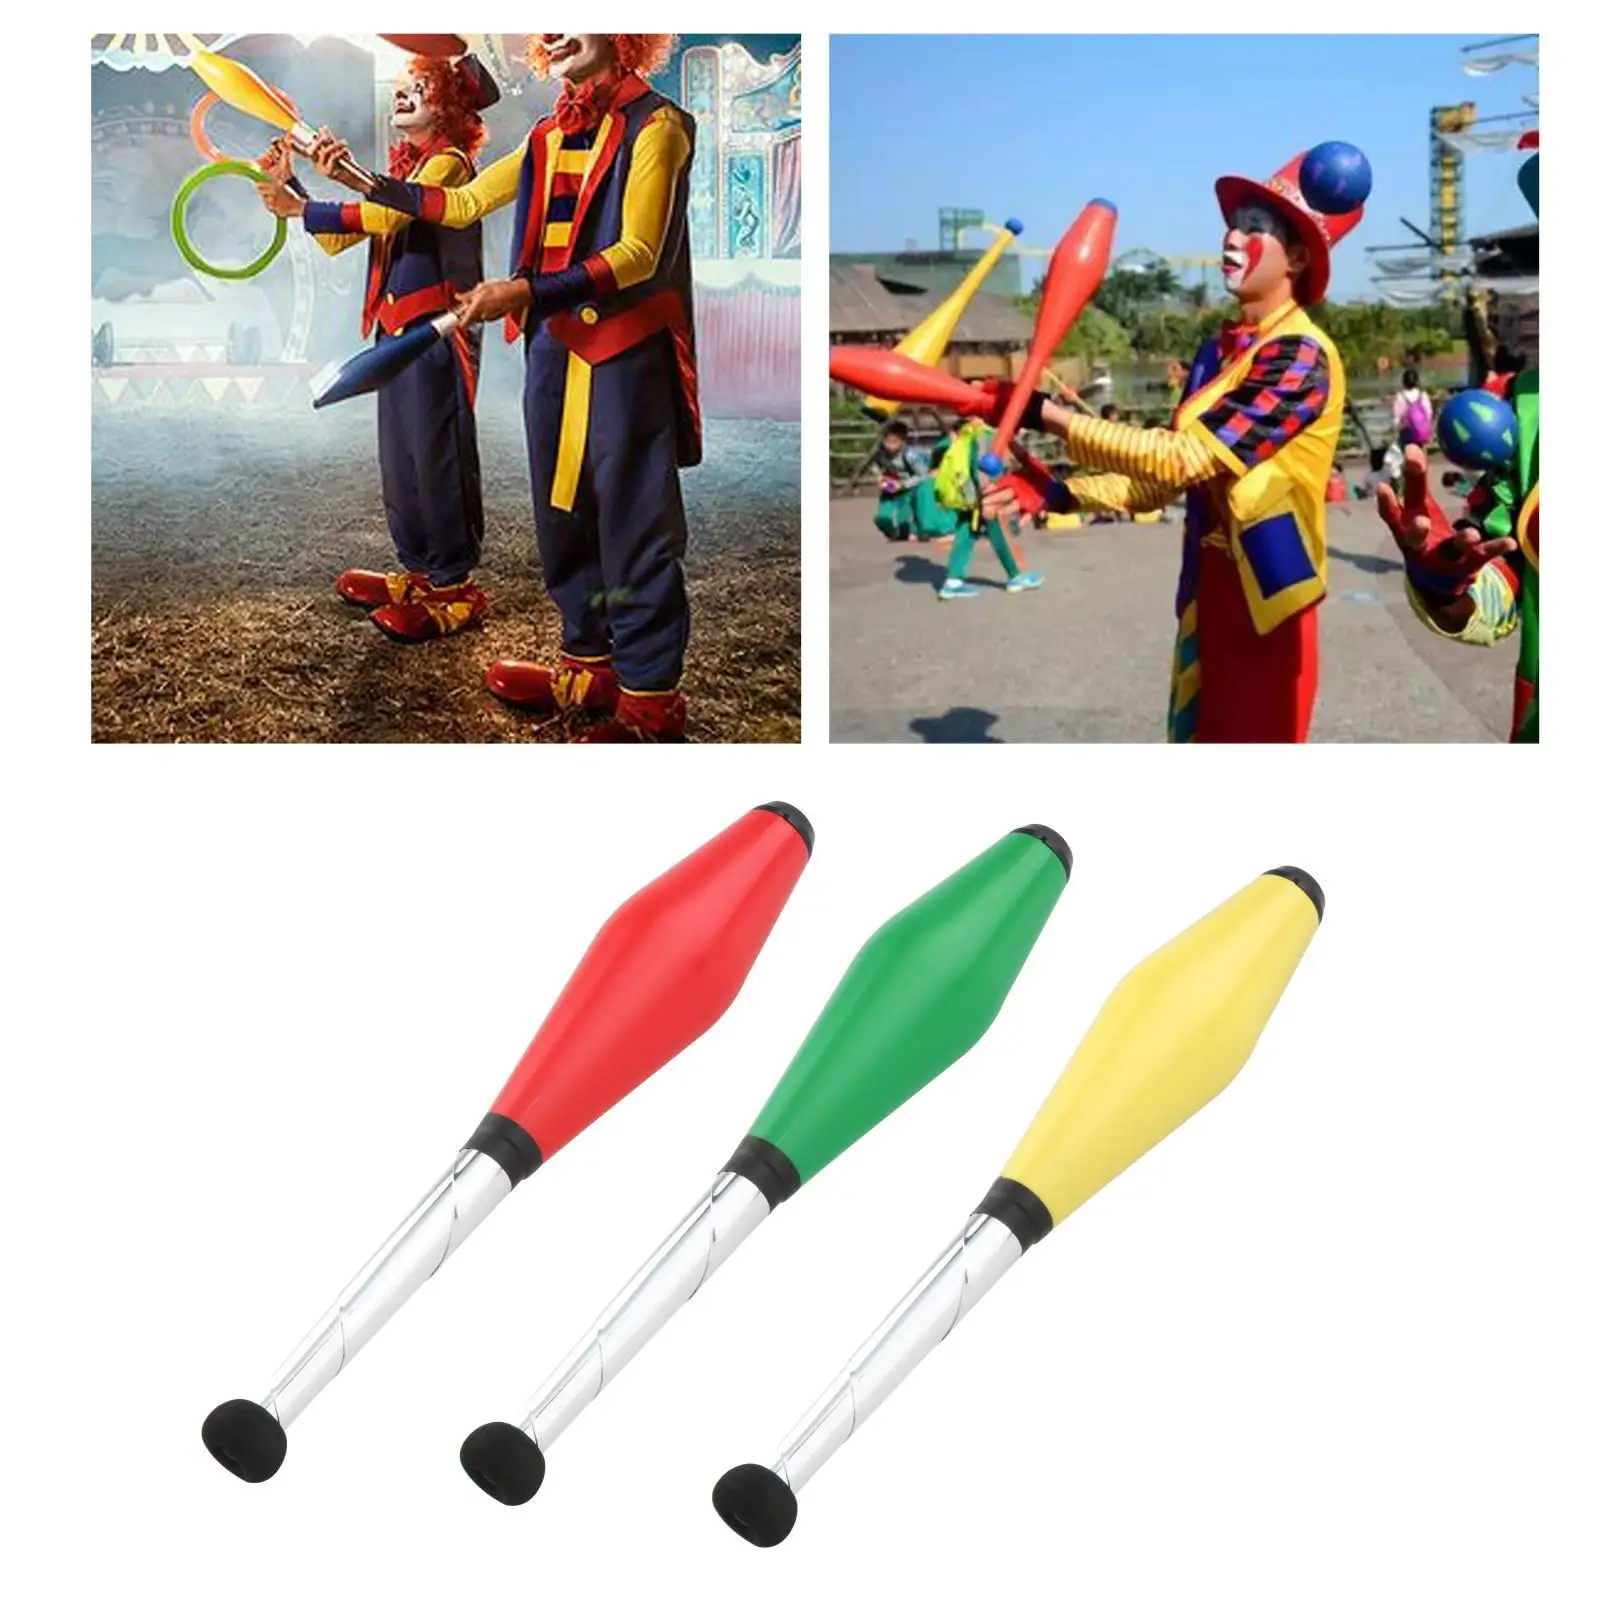 Pro Juggling Clubs Sticks Pins for Playing Toy Training School Exercise Act